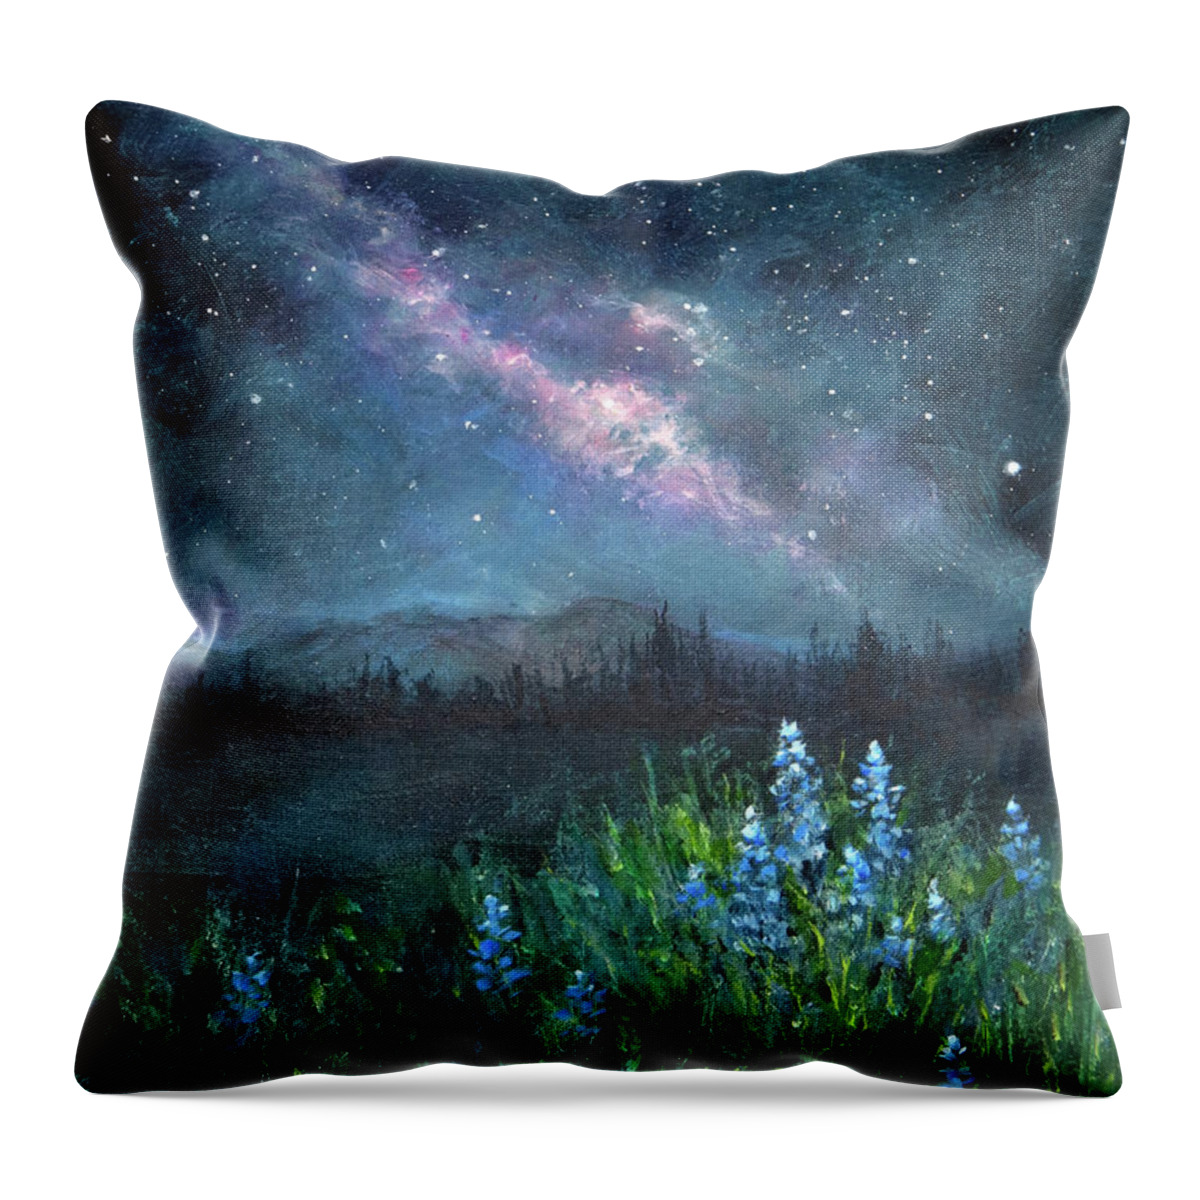 Meadow Throw Pillow featuring the painting Celestial Meadow by Zan Savage